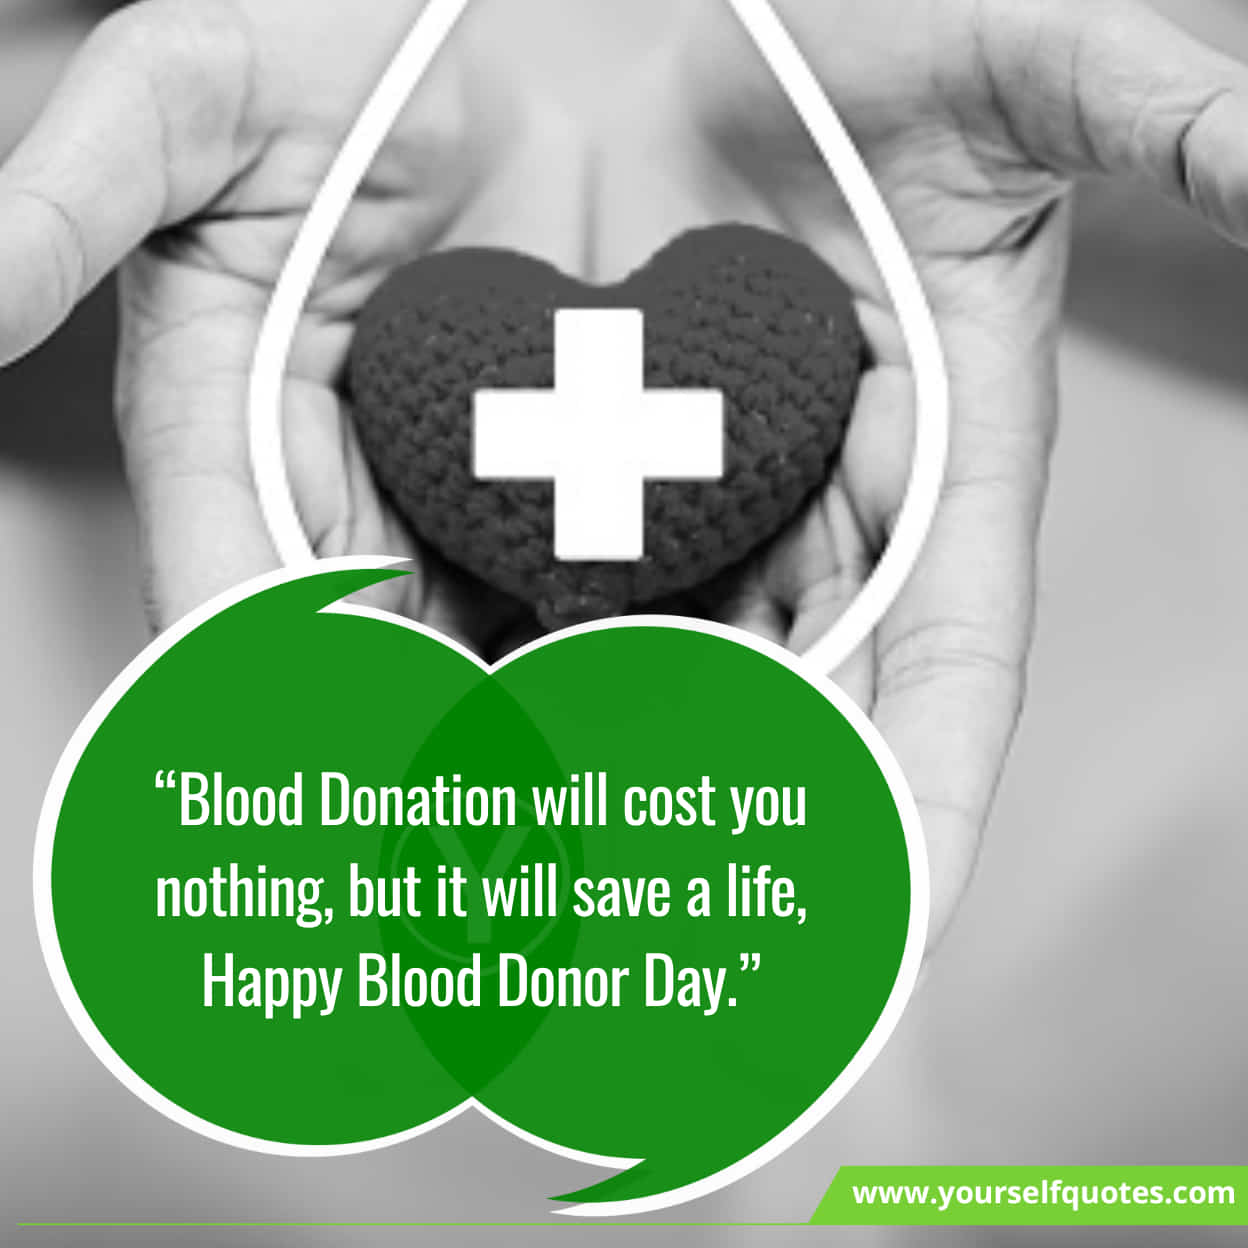 World Blood Donor Day Sayings